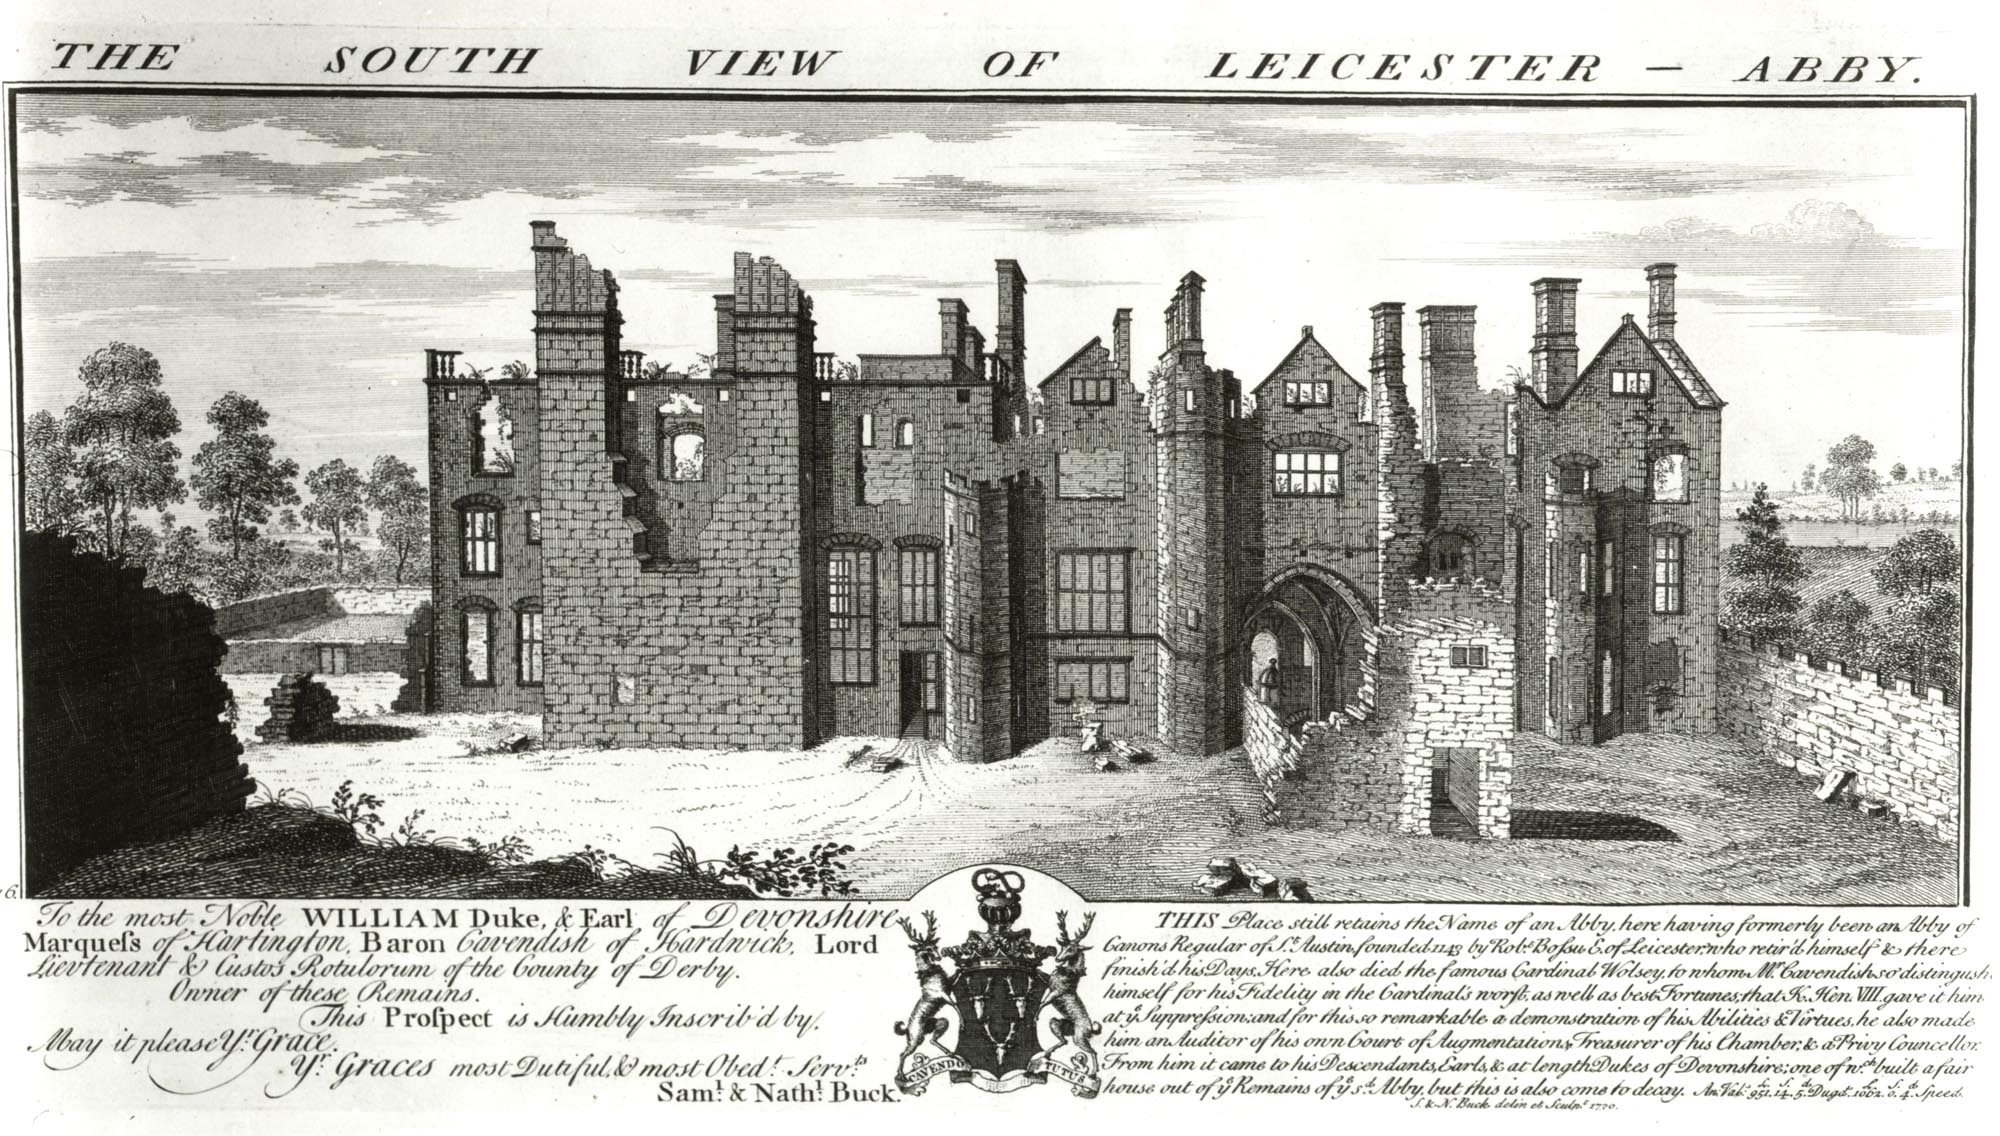 ‘The south view of Leicester Abby’ by Samuel and Nathaniel Buck, 1730 -